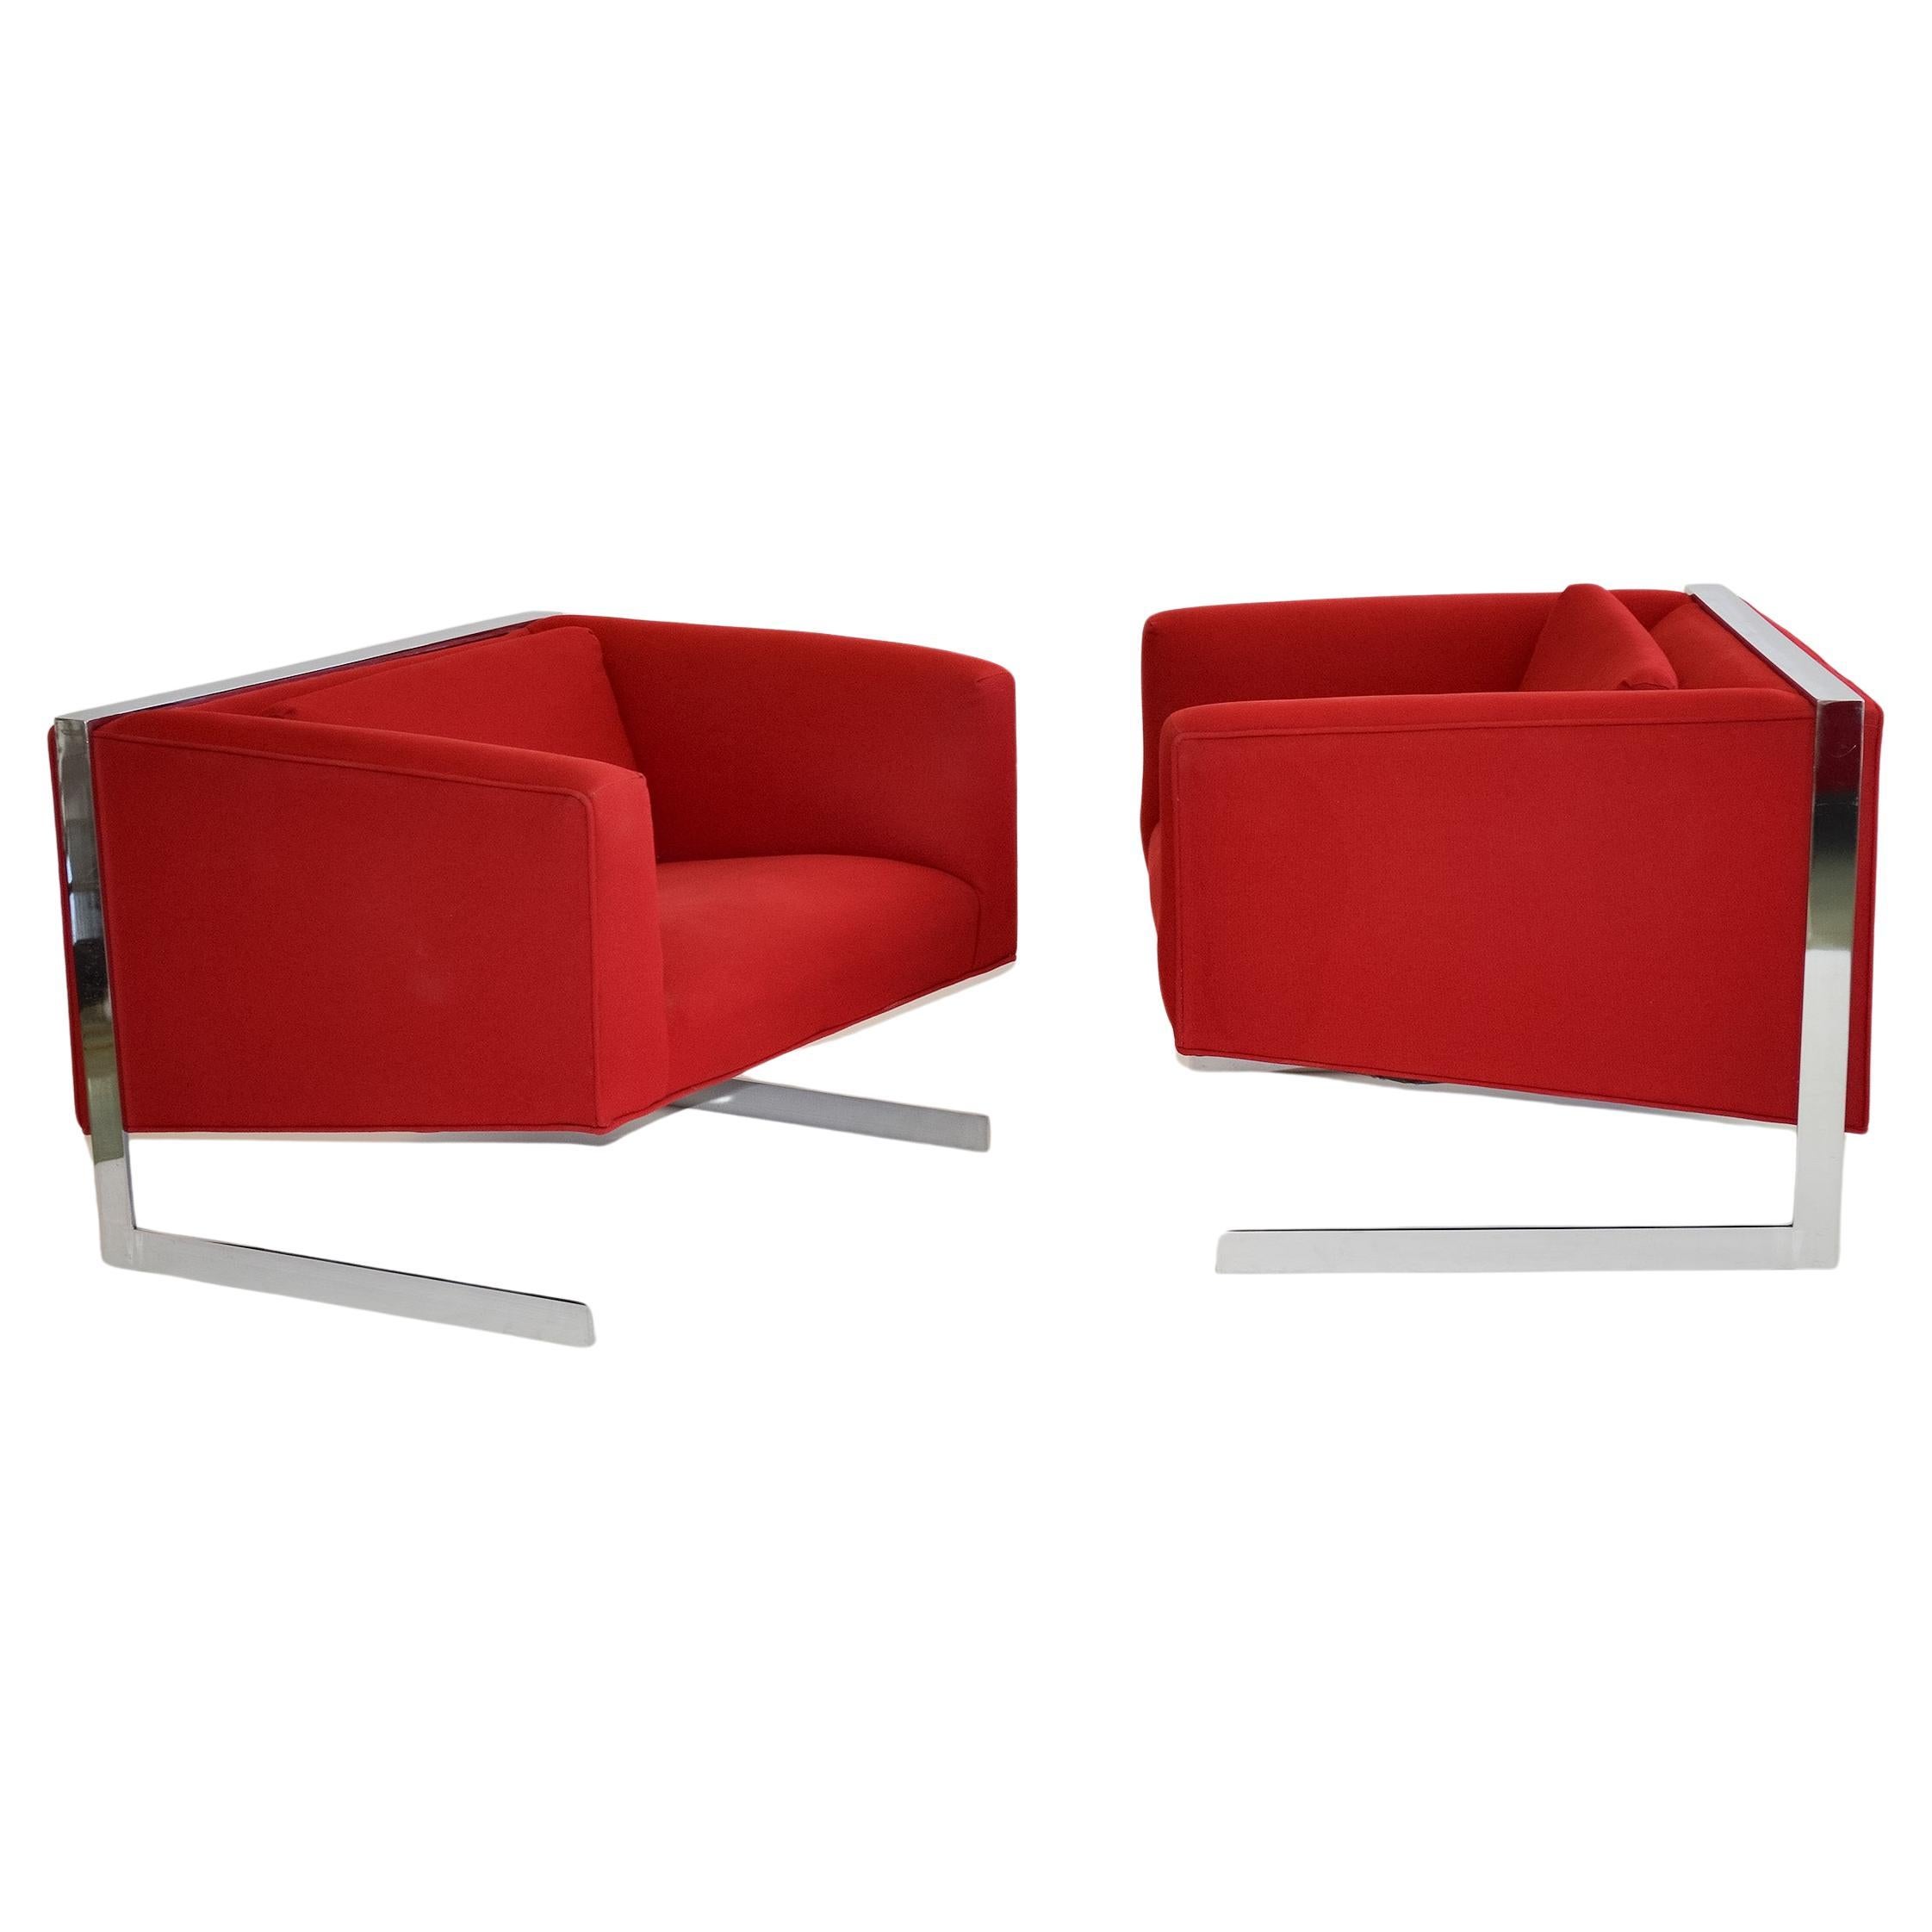 Pair of Milo Baughman Cantilevered Lounge Chairs for Thayer Coggin Mid Century